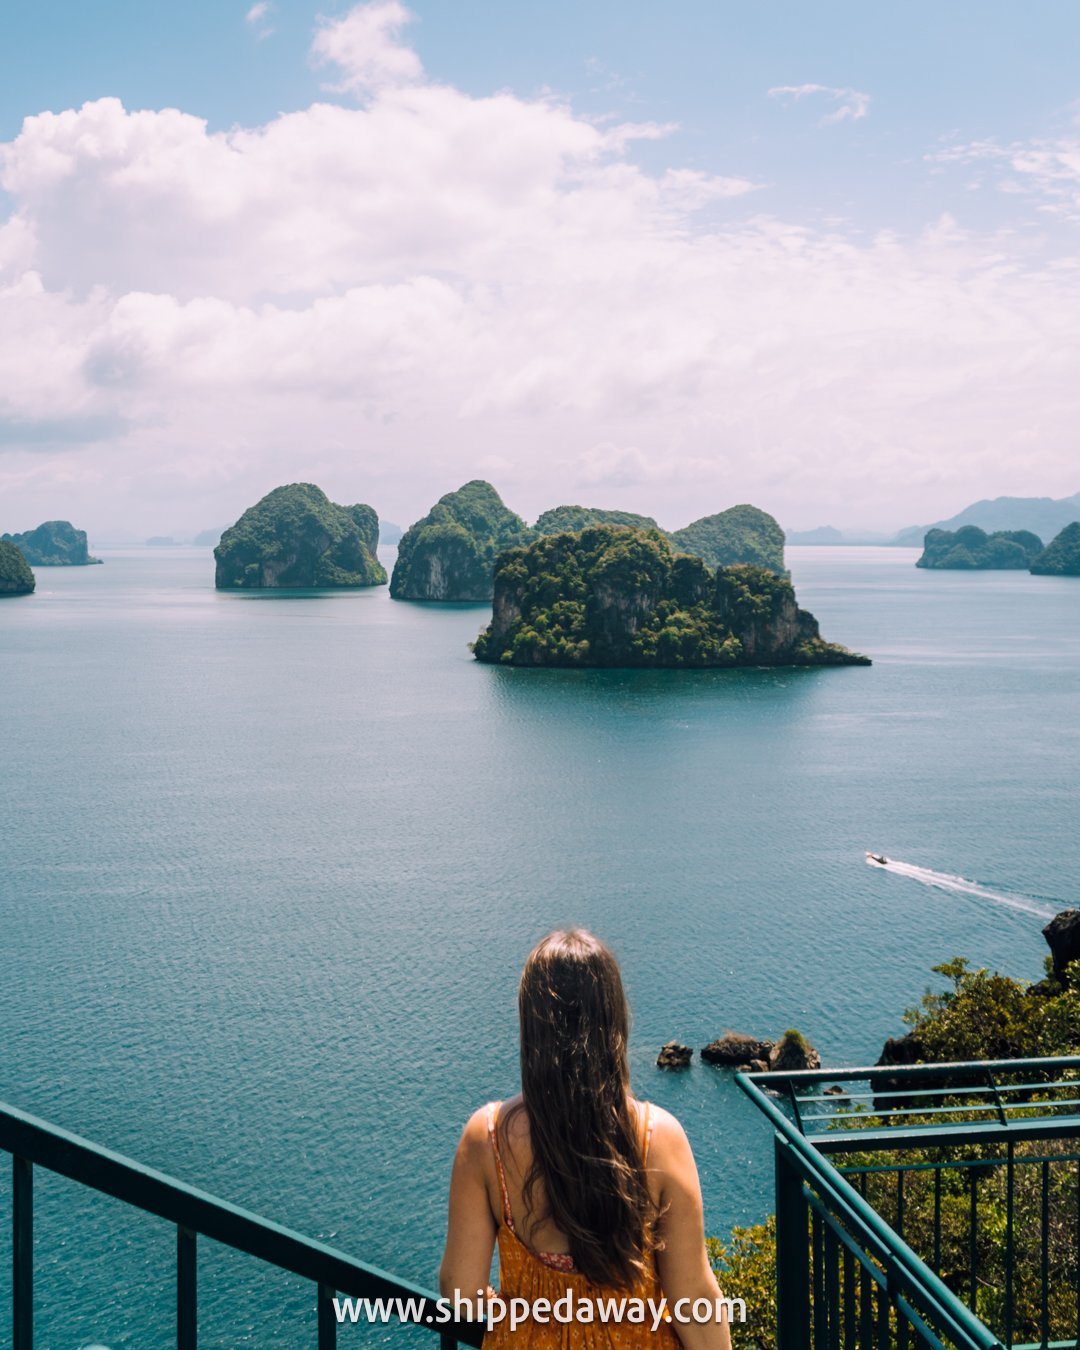 View from 360 viewpoint on Hong Island, Krabi